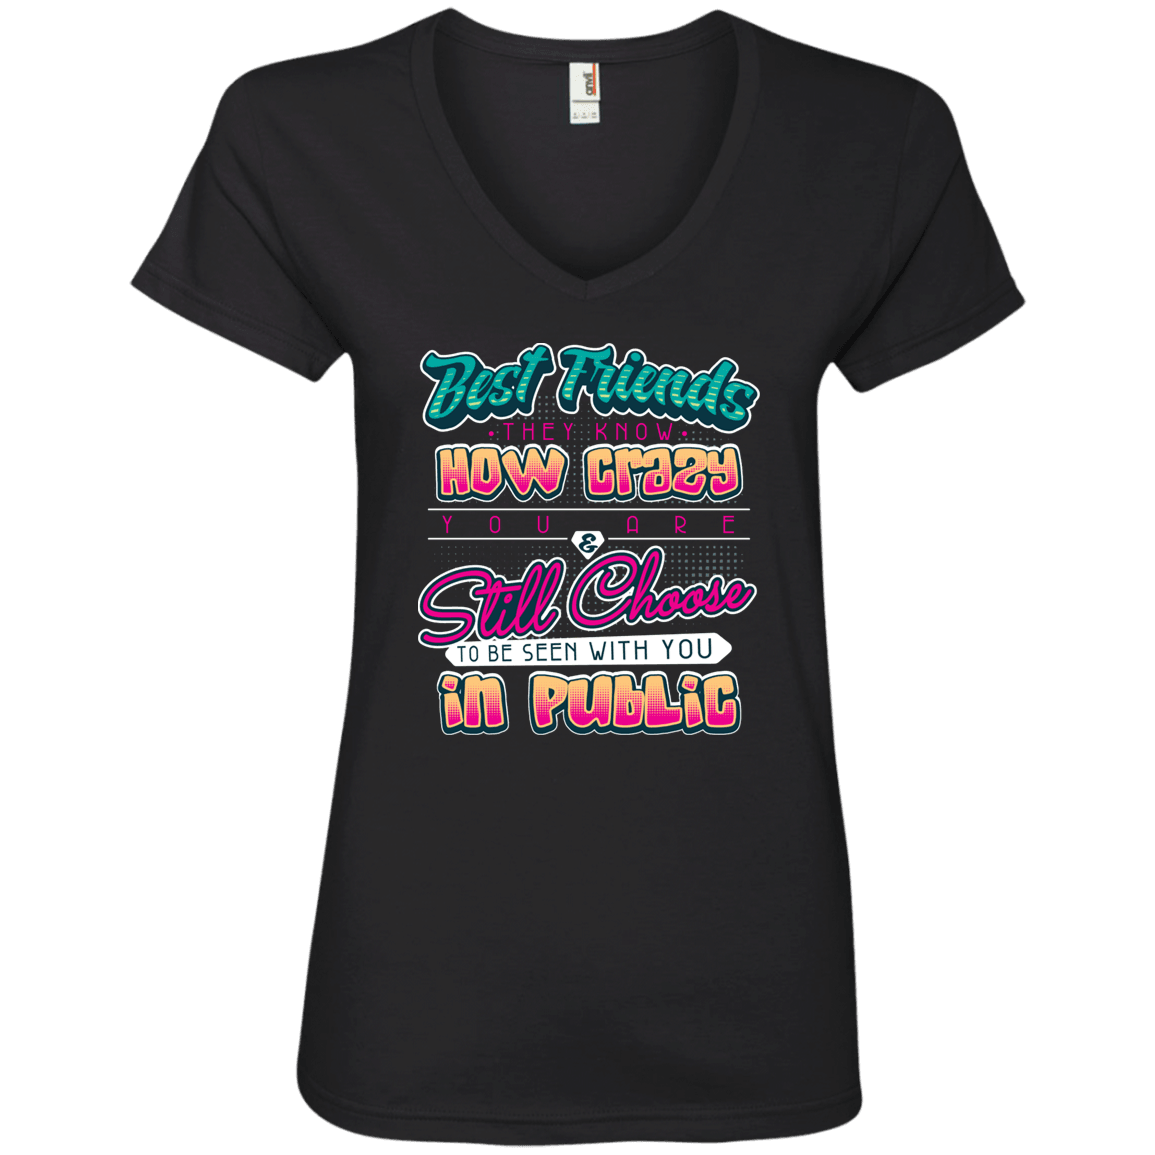 Designs by MyUtopia Shout Out:Best Friends They Know How Crazy You Are Ladies' V-Neck T-Shirt,Black / S,Ladies T-Shirts